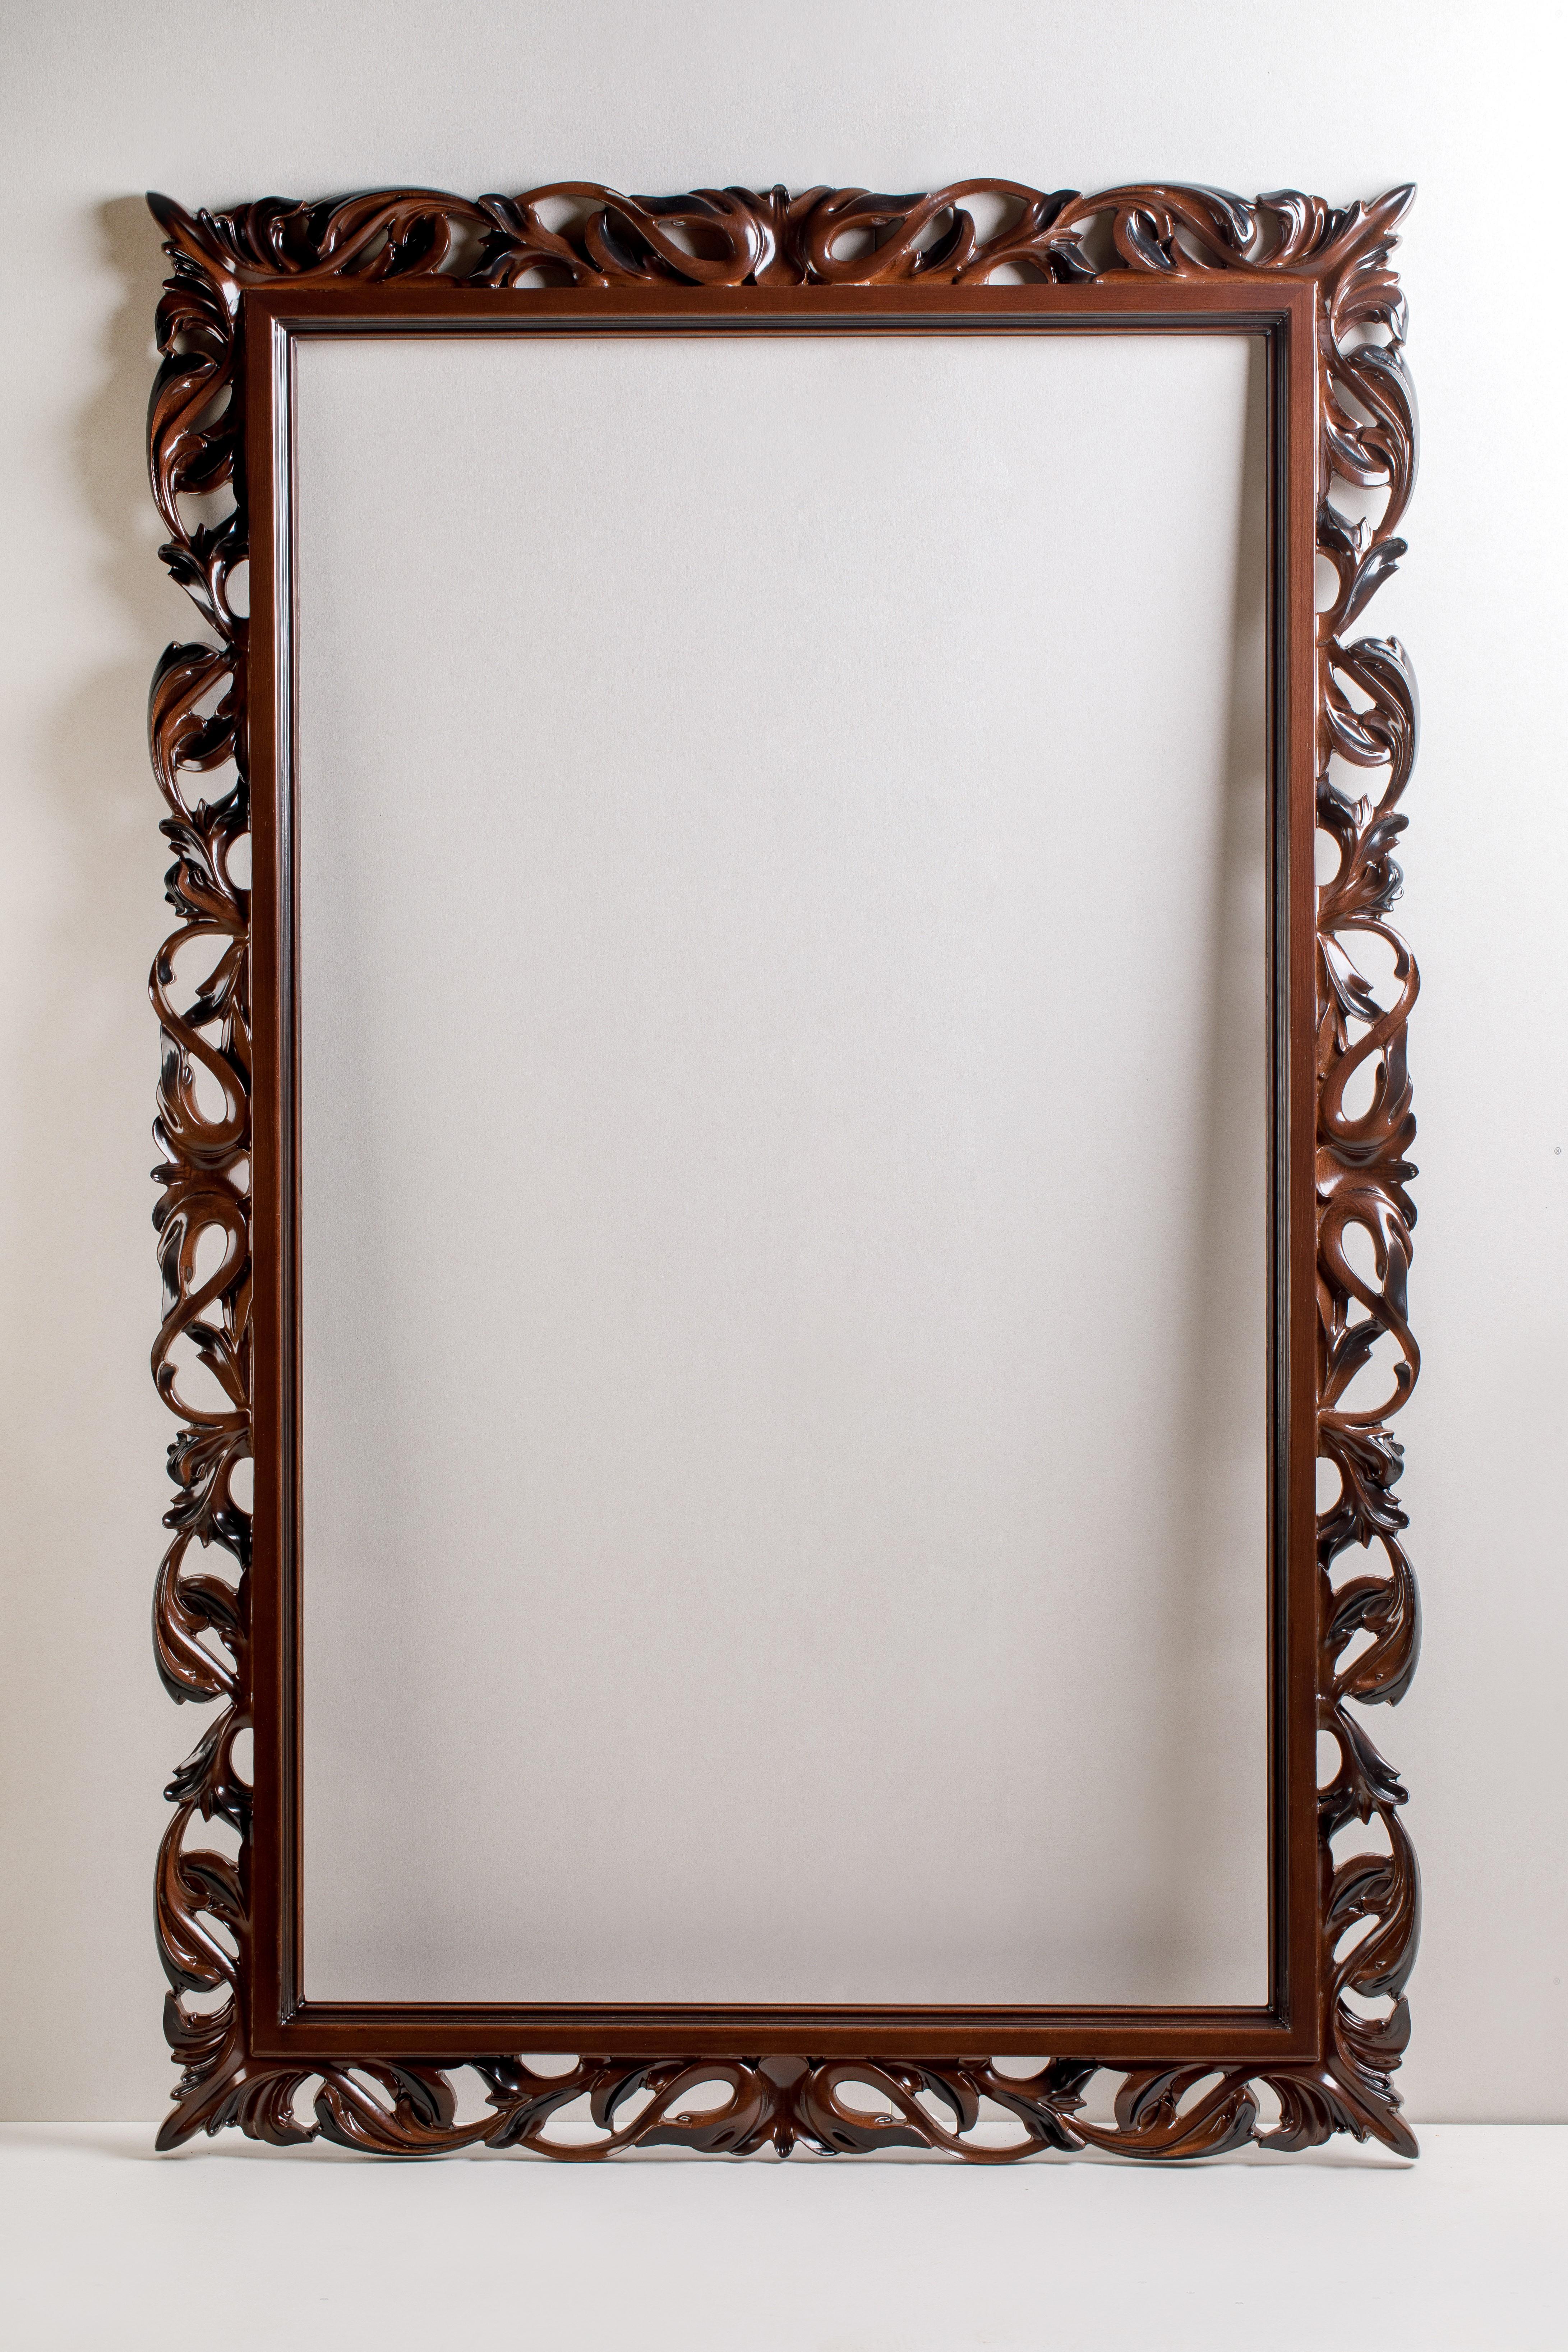 THE CHERRY TRADITIONAL BEVELED ACCENT MIRROR
New – not previously owned. Shows absolutely no signs of wear.

Dimensions
H 68.90 in. x W 44.49 in. x D 1.38 in.
H 175cm x W 113cm x D 3.5 cm

DATE OF MANUFACTURE 2021
The frame comes with the